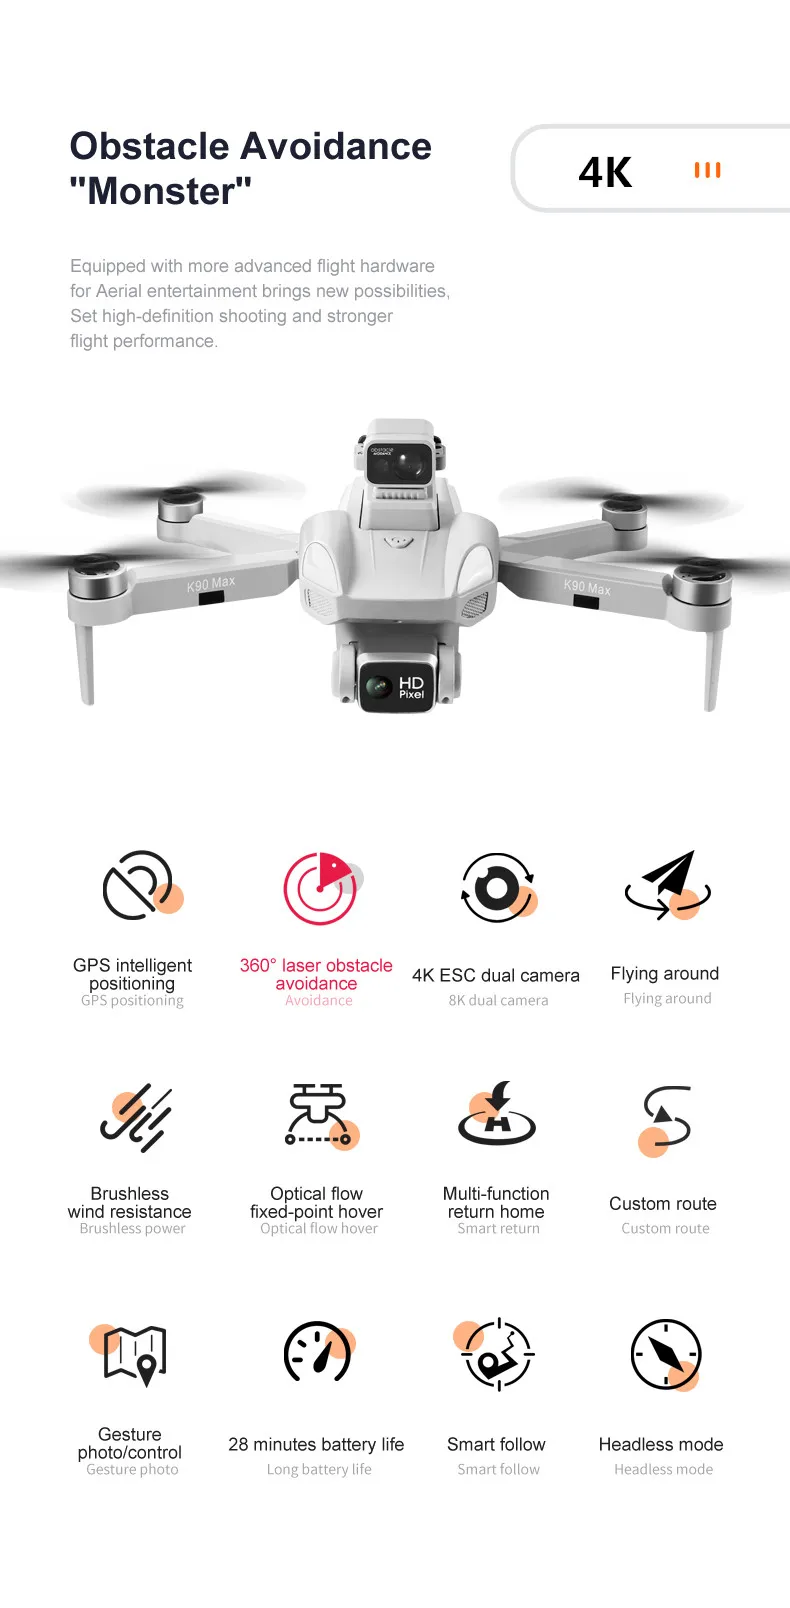 K90 Max drone, Obstacle Avoidance 4K "Monster" has more advanced flight hardware for Ae